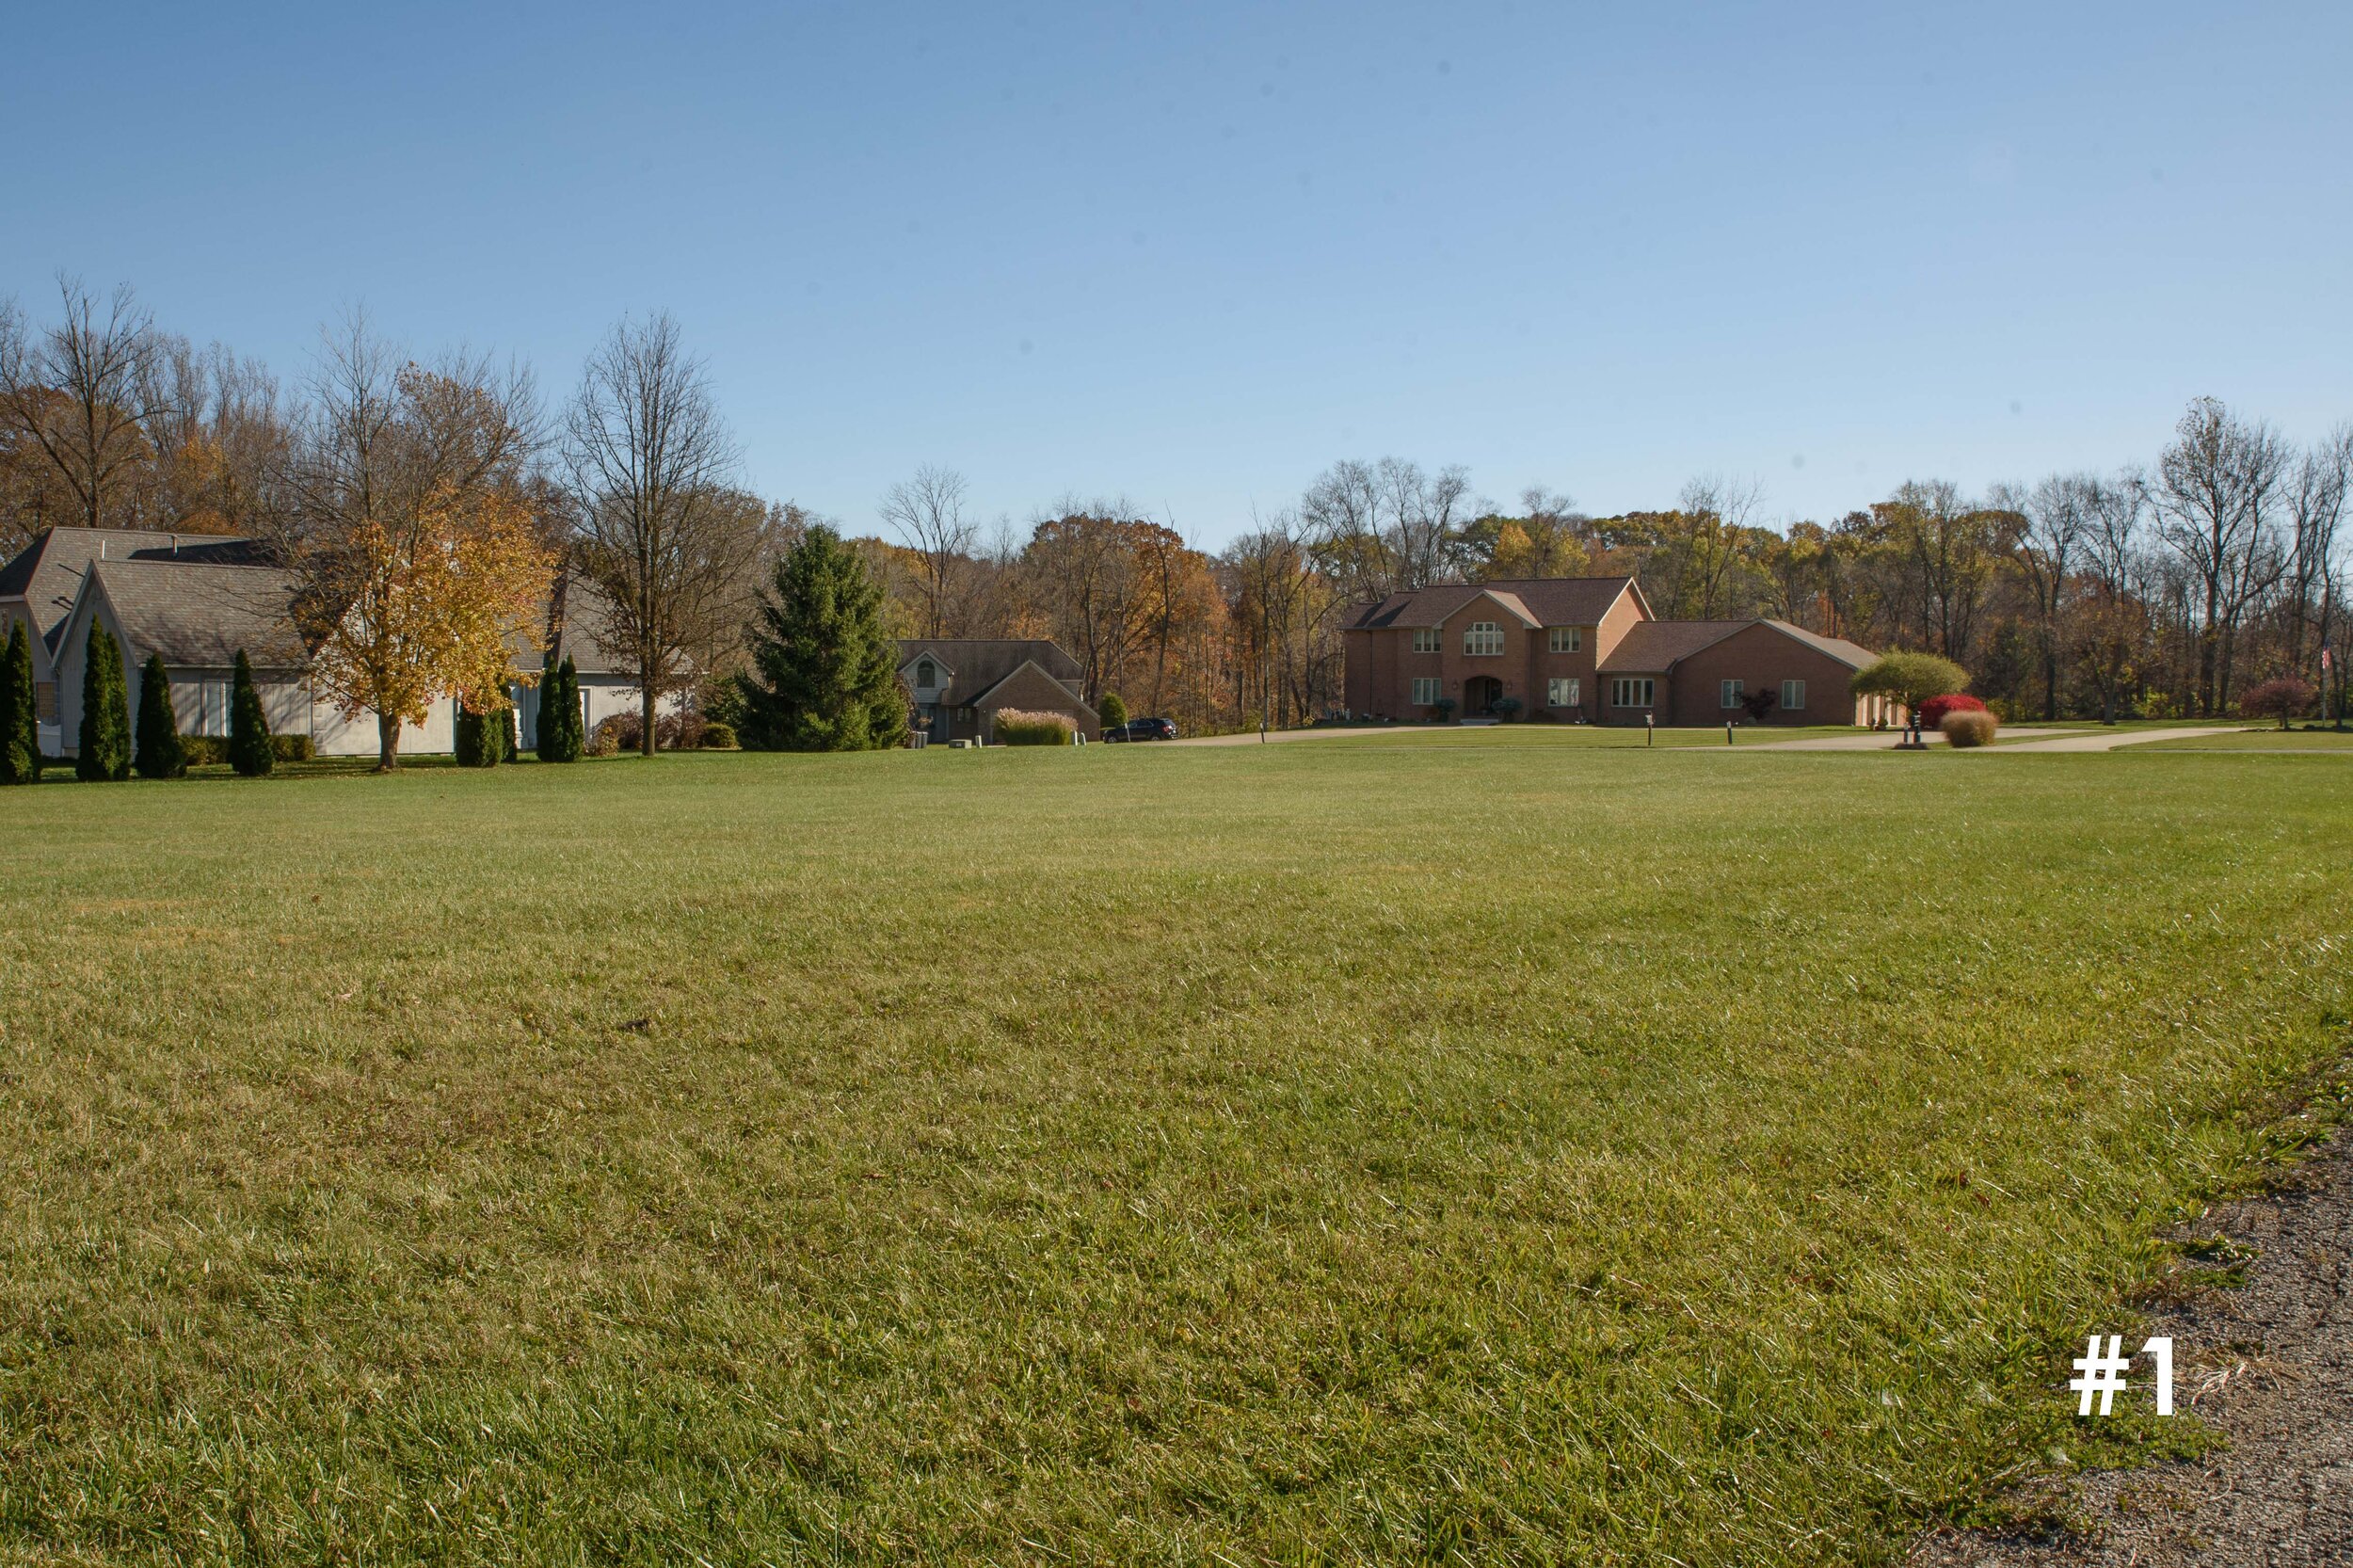 LOT #1 | Leigh Woods Land Lot for Sale